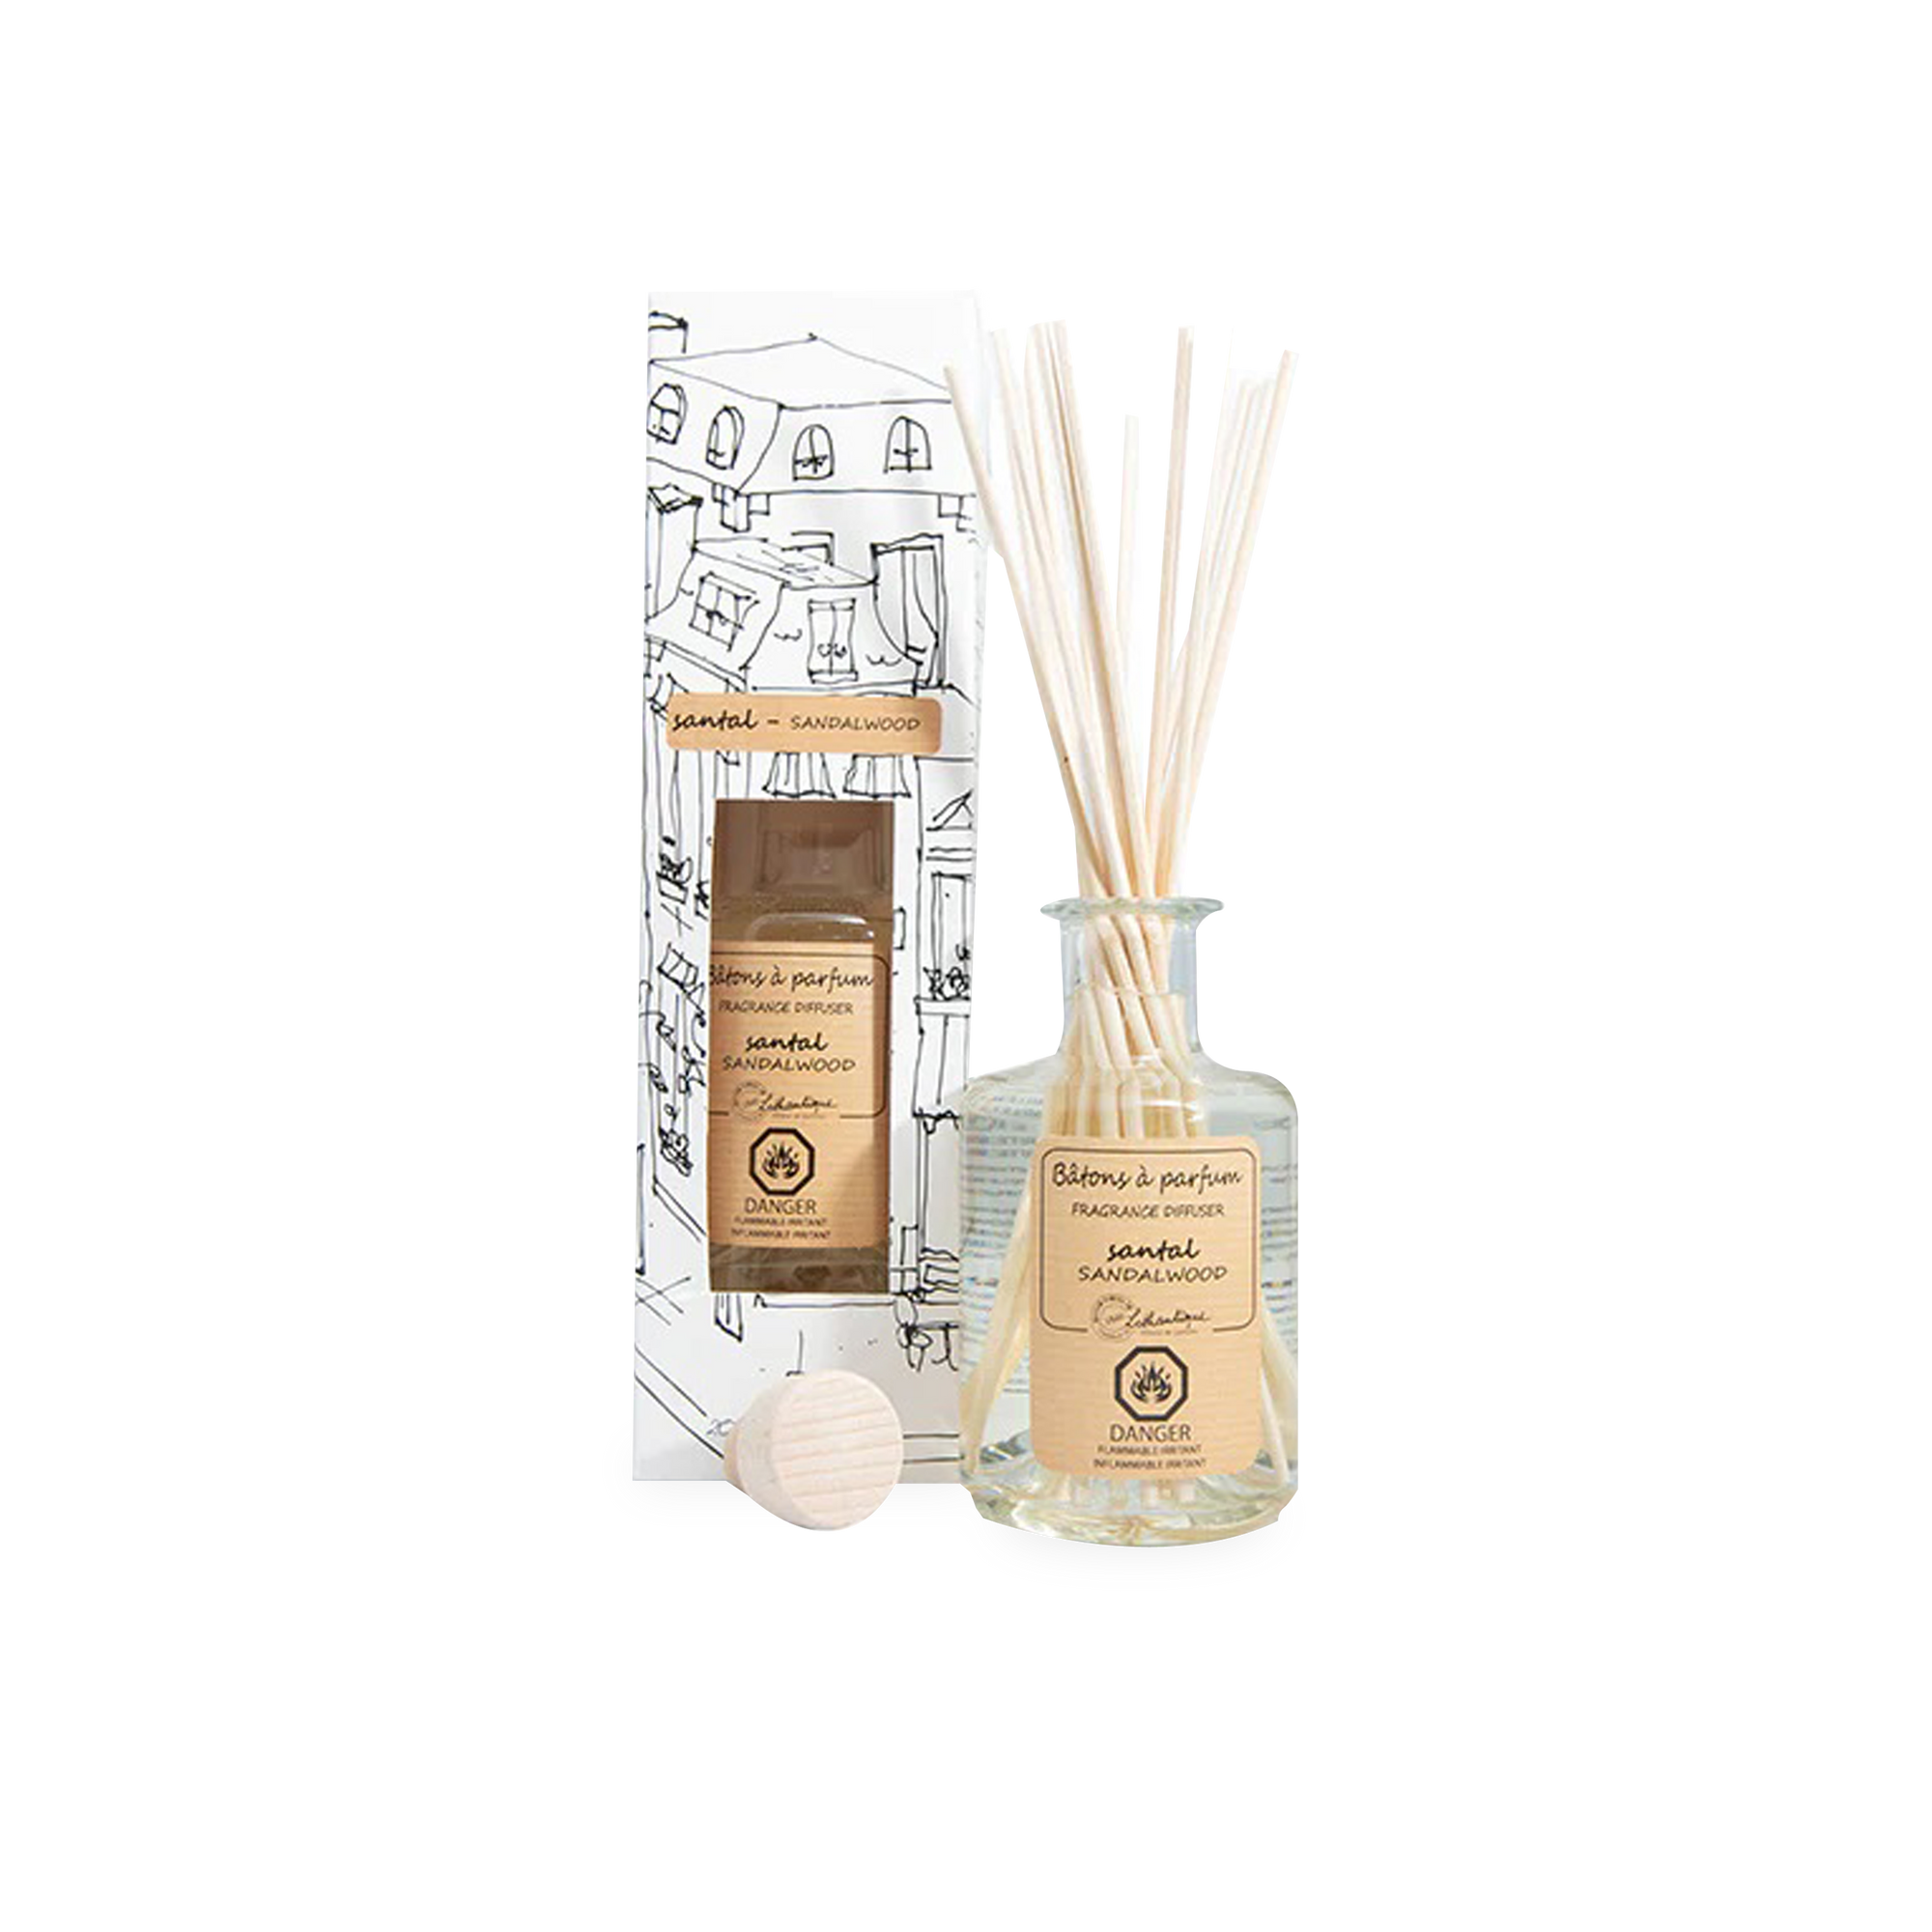 Bring the aromas of France into your home using the Sandlewood Diffuser.